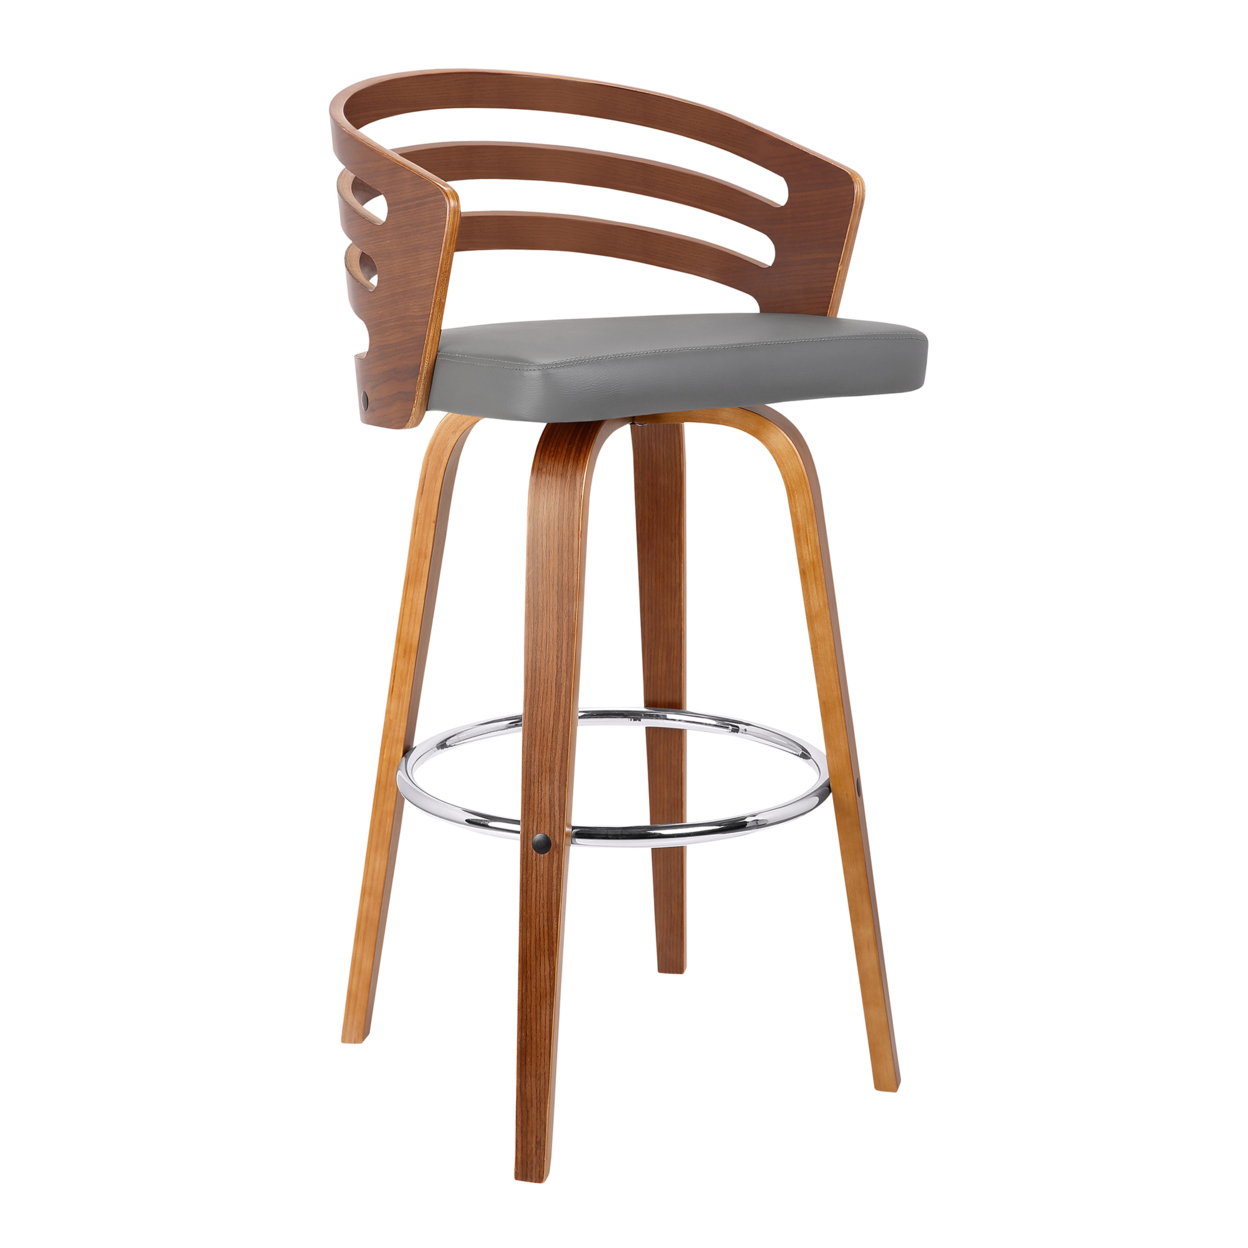 Leatherette Swivel Wooden Barstool With Curved Back, Brown And Gray- Saltoro Sherpi